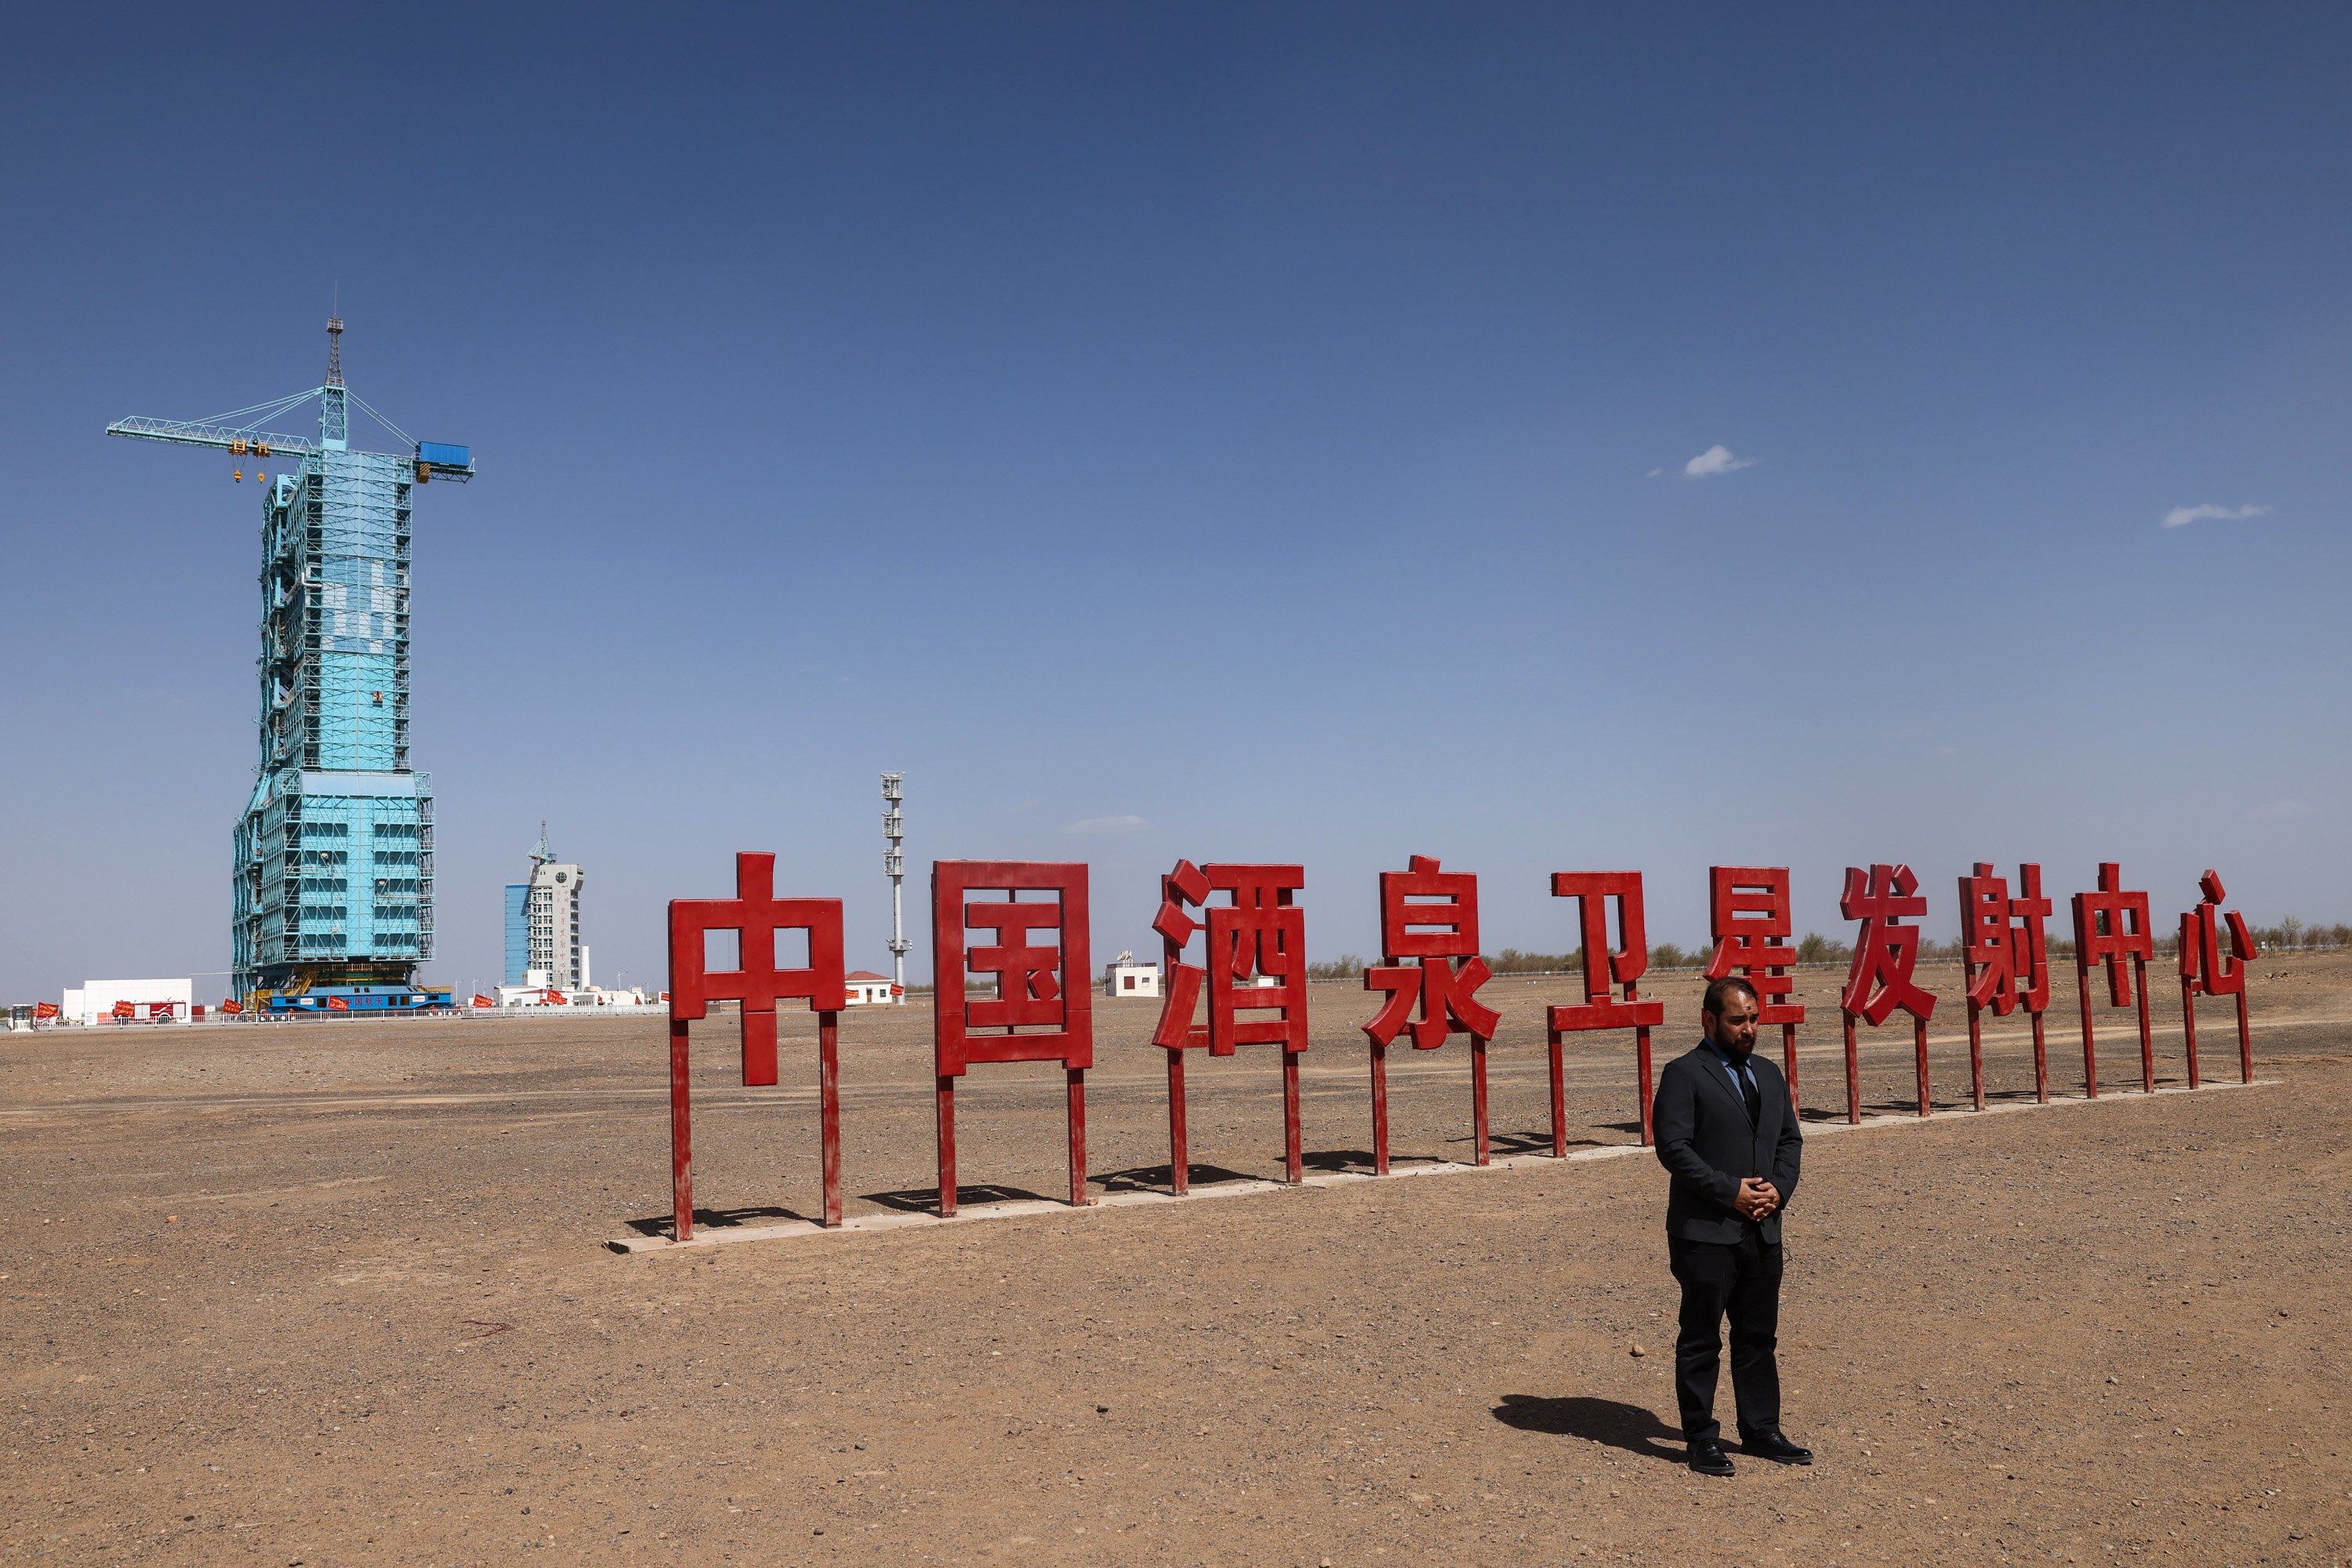 Preparations are made for the Shenzhou-18 spaceflight mission, in Jiuquan, Gansu province, on Thursday. China’s Shenzhou-18 manned spaceflight mission is the third manned spaceflight mission of China Space Station’s development phase. Photo: EPA-EFE